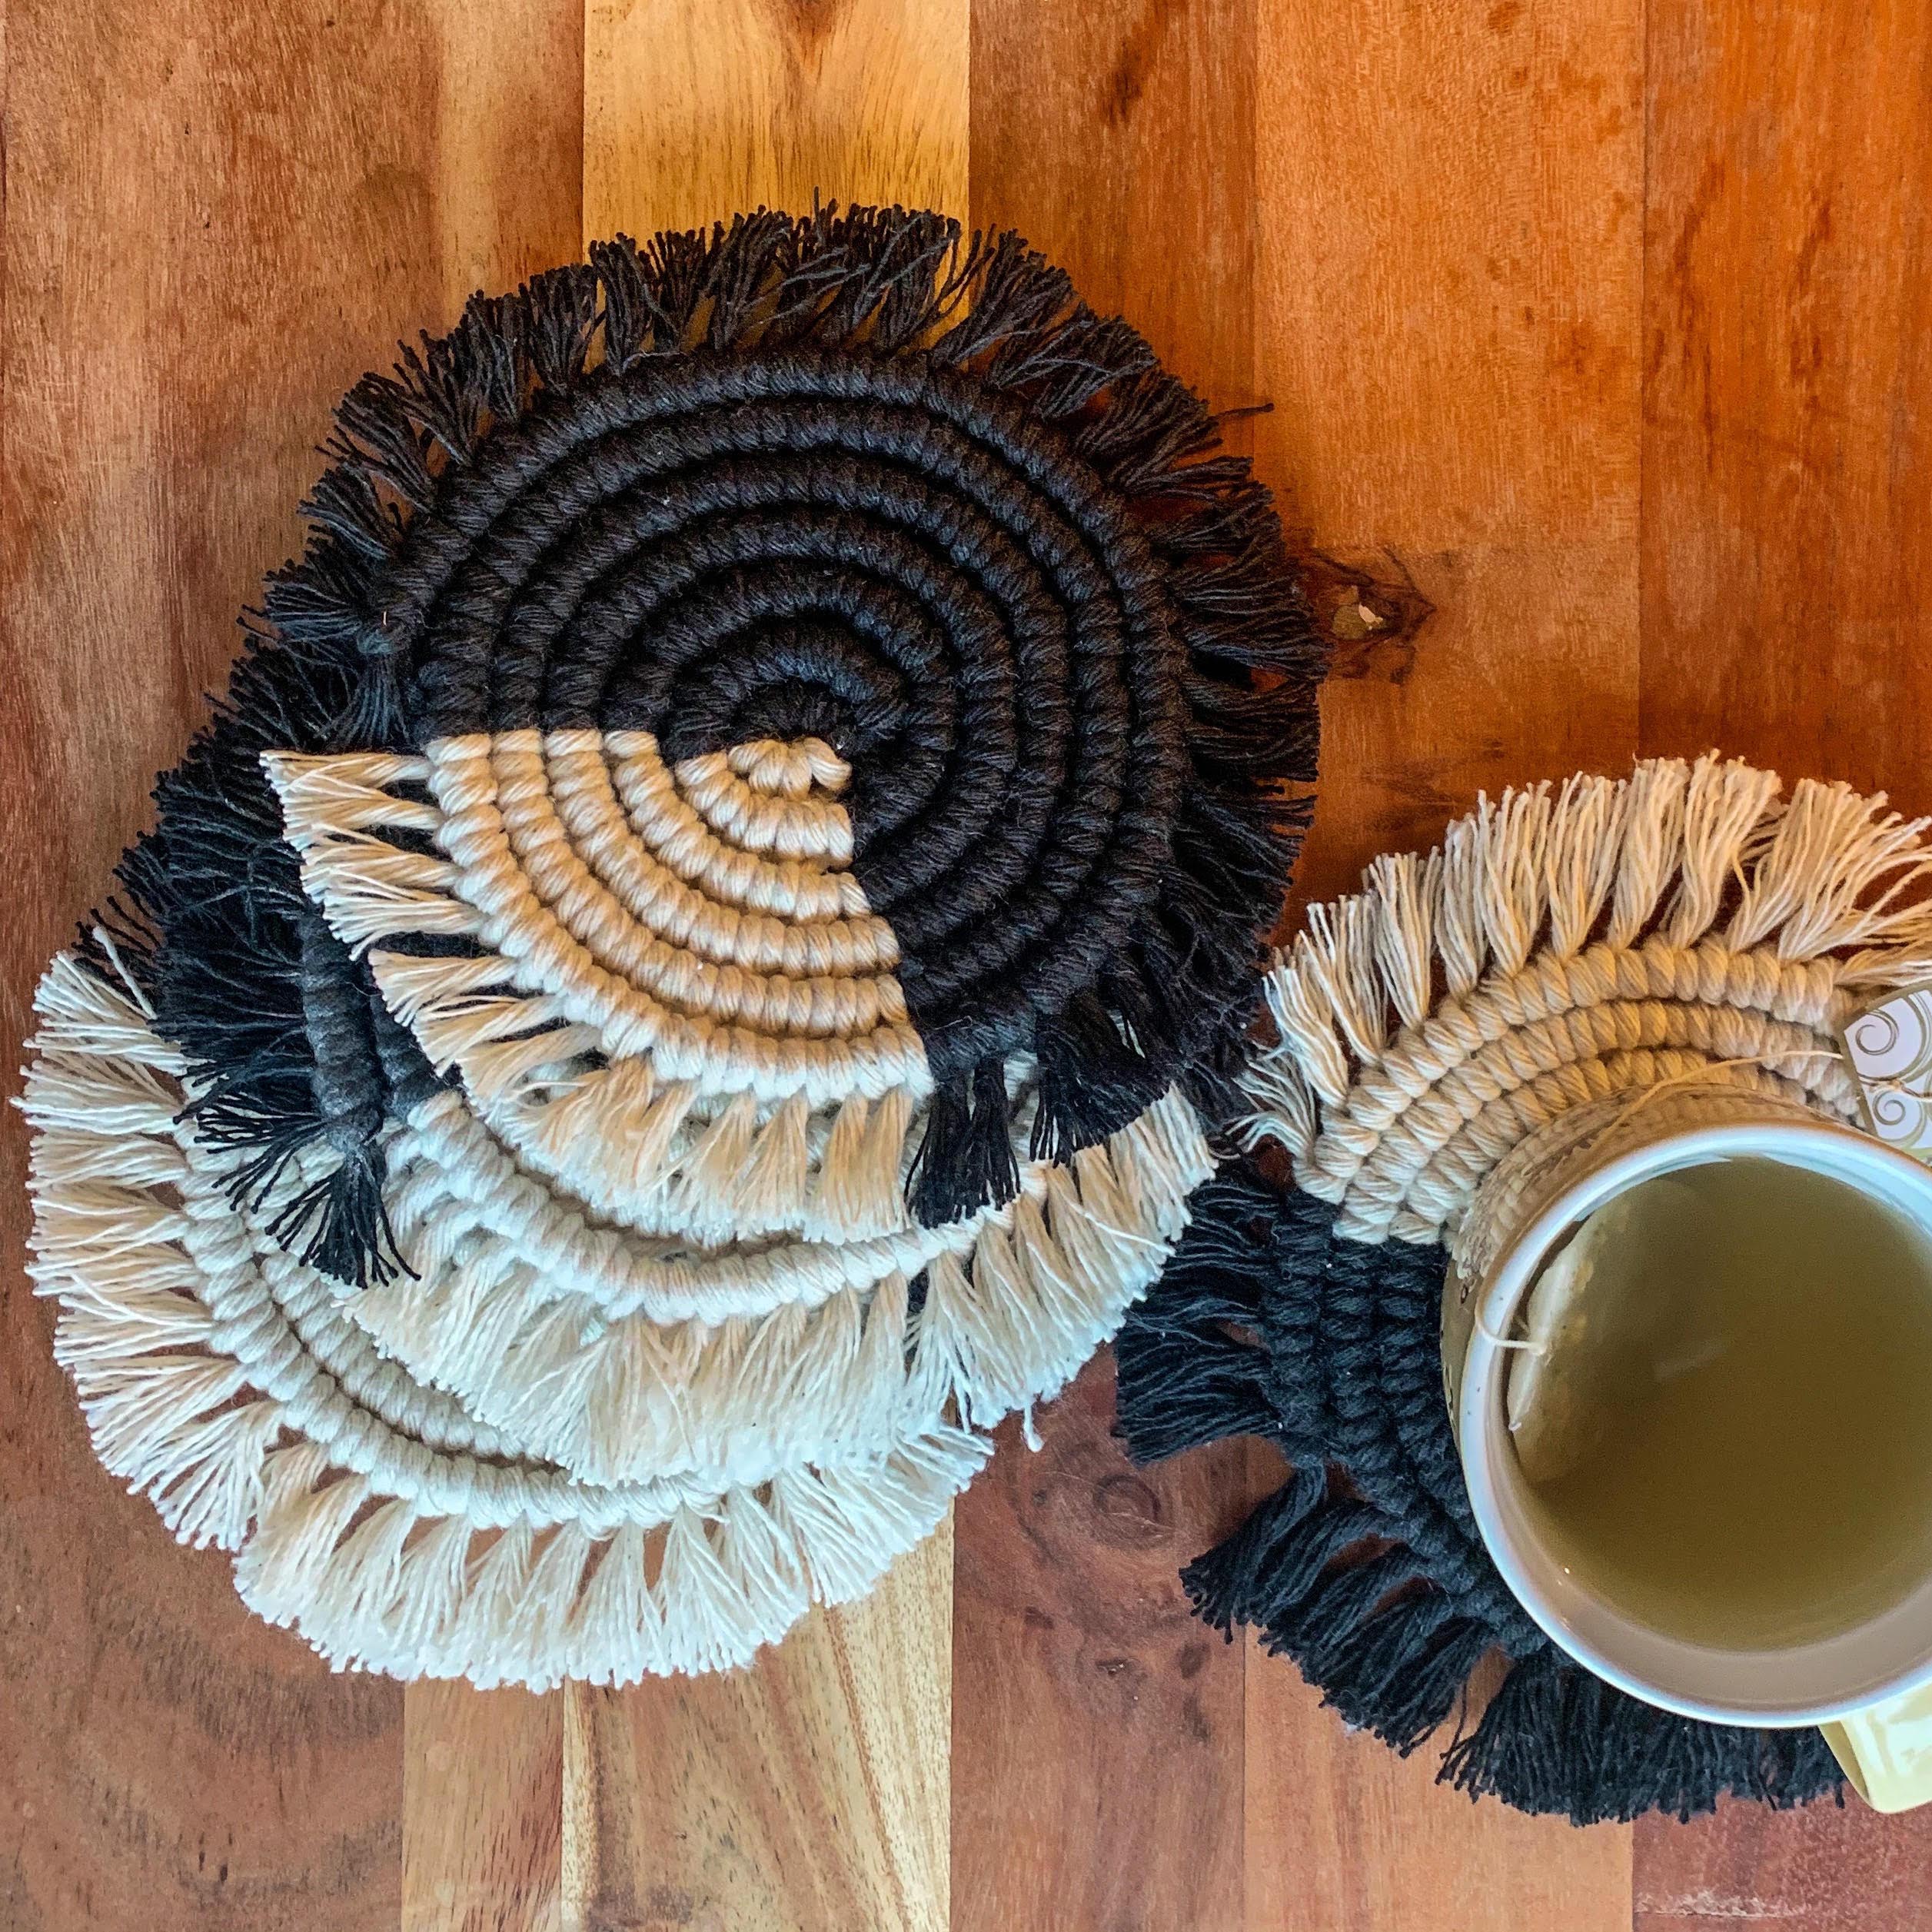 A cup of tea placed on a round handwoven coaster. This is a set of 4 round macrame coasters made with black and white cotton yarn.